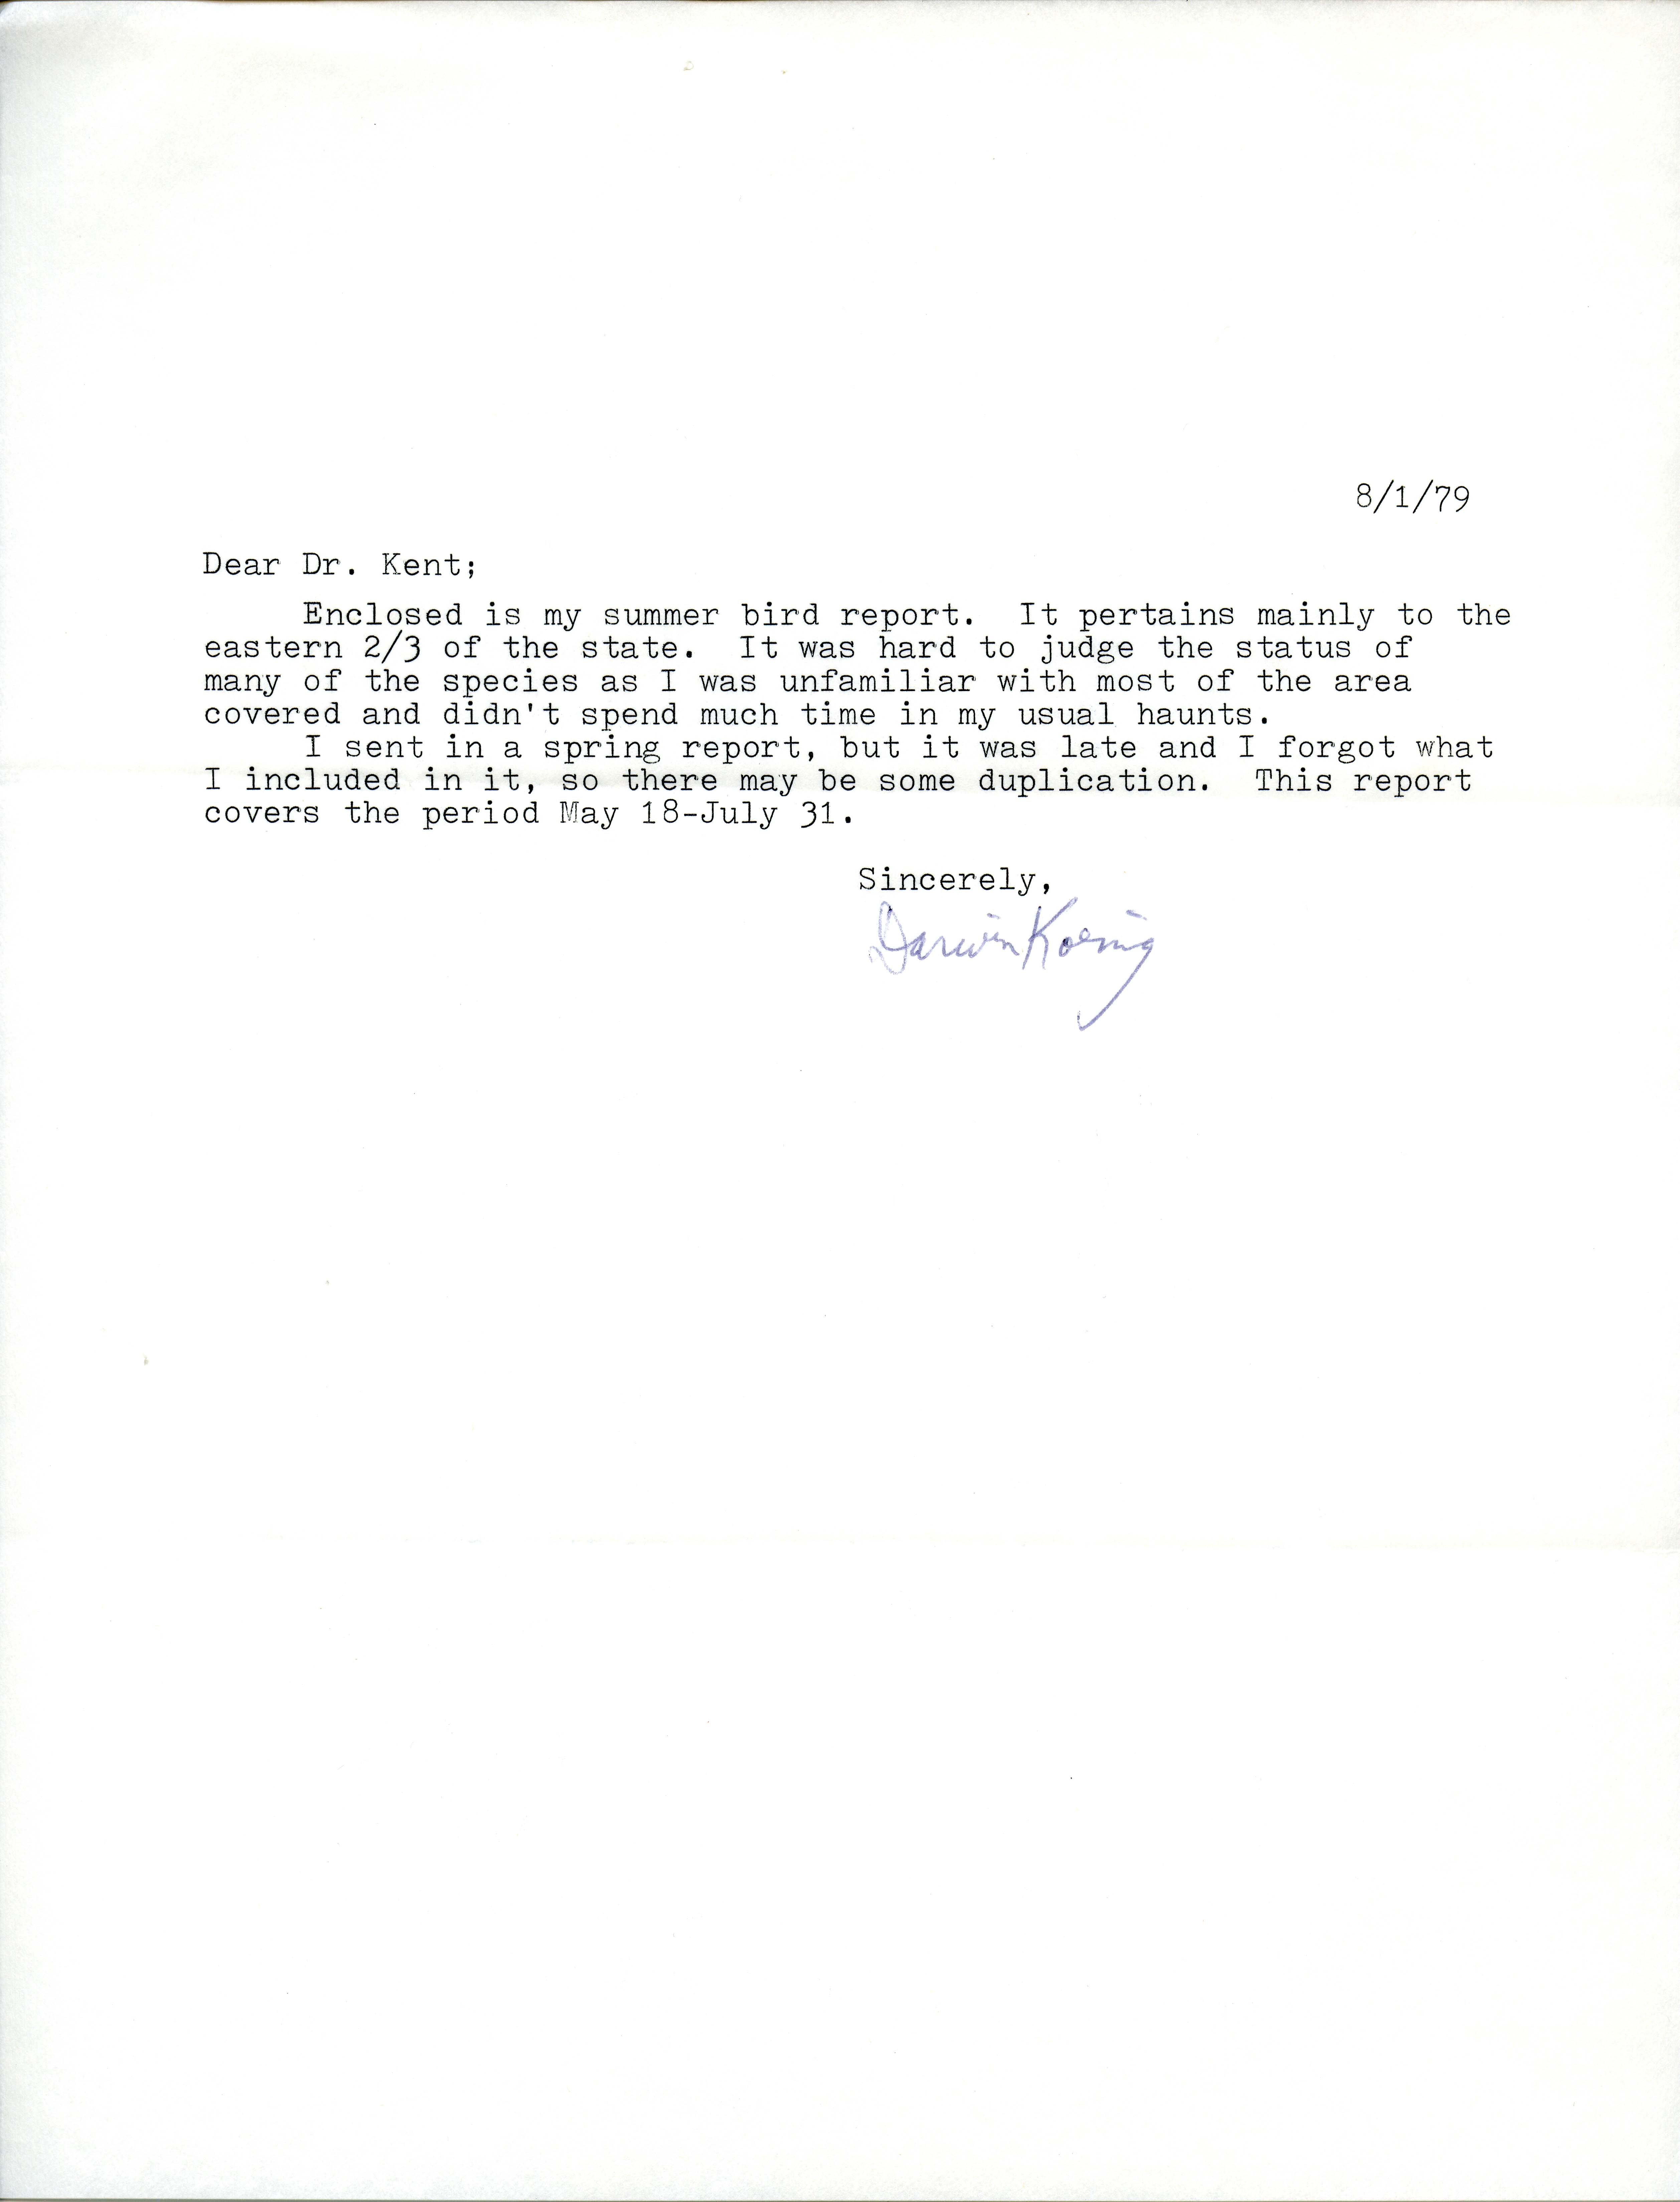 Darwin Koenig letter to Thomas H. Kent regarding included field notes, August 1, 1979